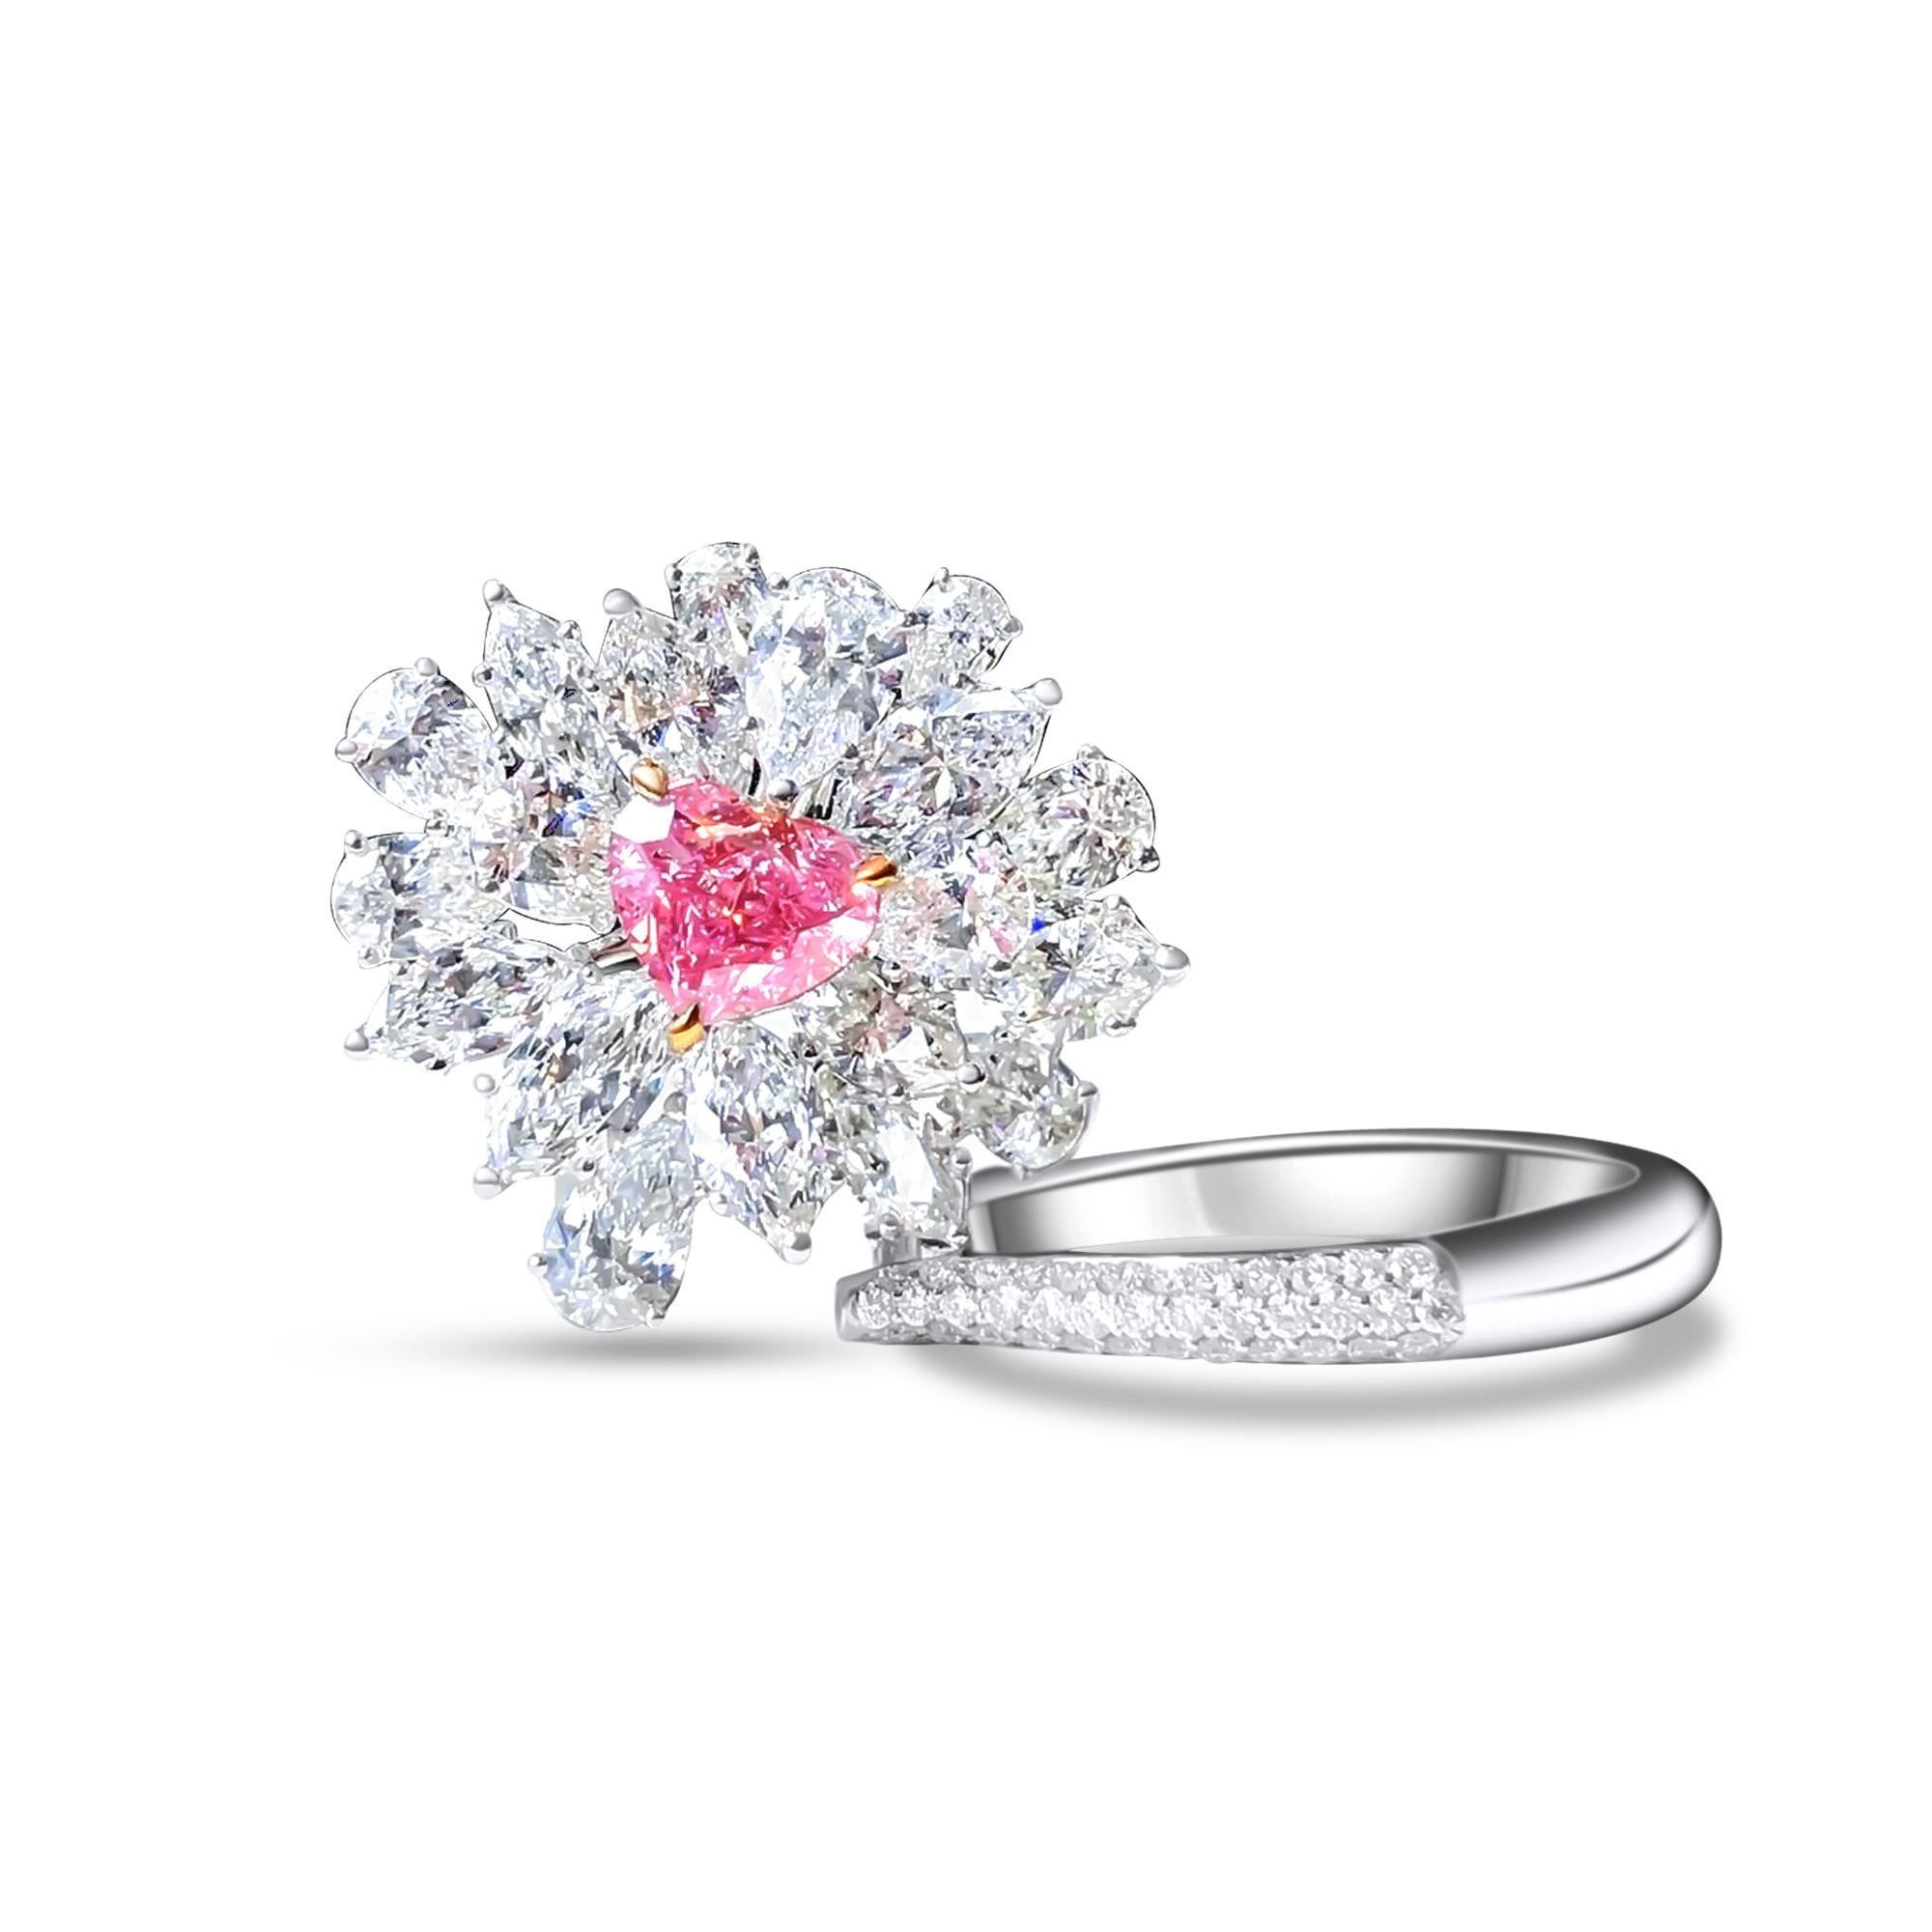 We invite you to discover this elegant ring set with a GIA certified heart-cut pink diamond of 1.01 carats accented with pear-cut colorless diamonds of 4 carats in total. Versatile, it can also be worn as a magnificent pendant 

New ring 
Main